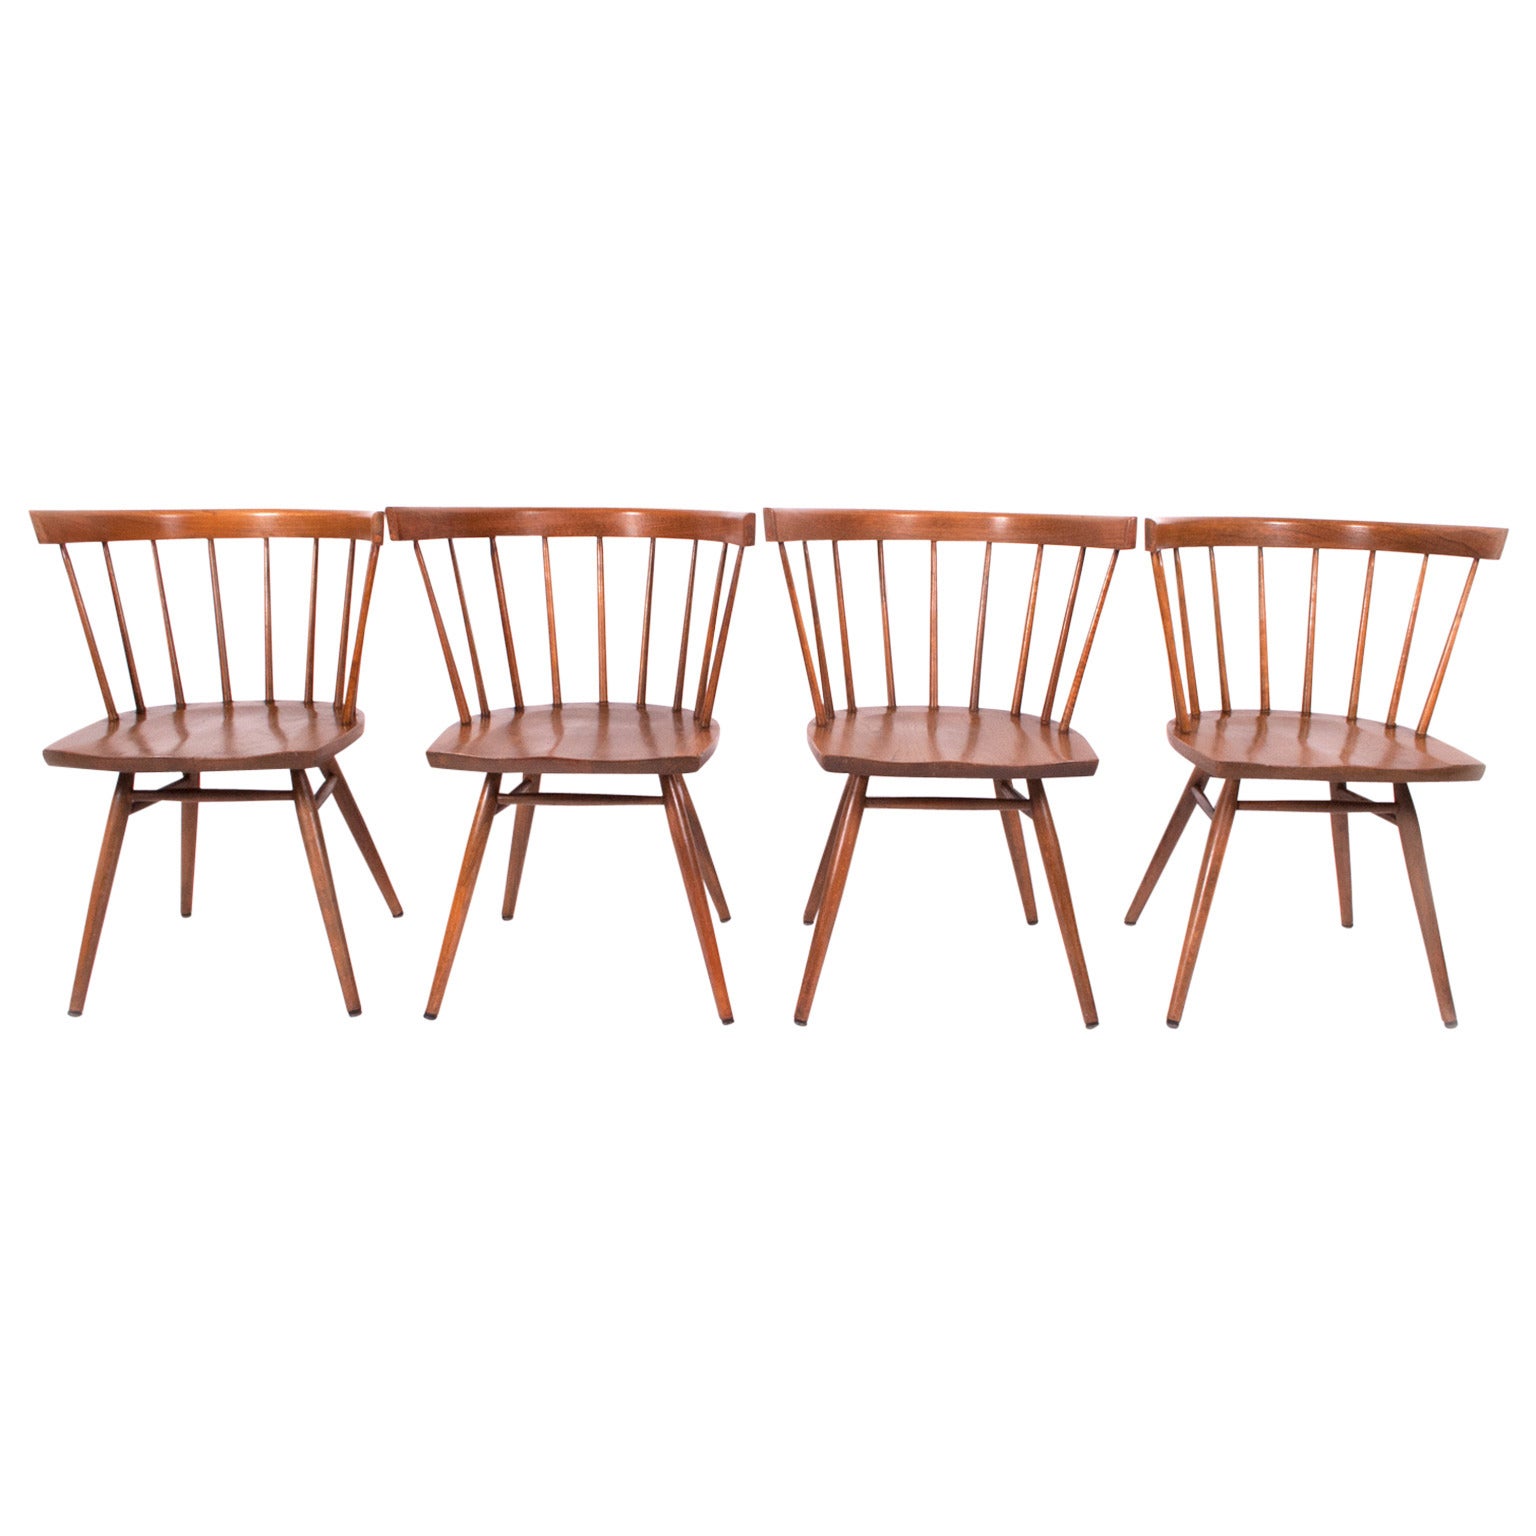 Four George Nakashima Attributed Dining Chairs